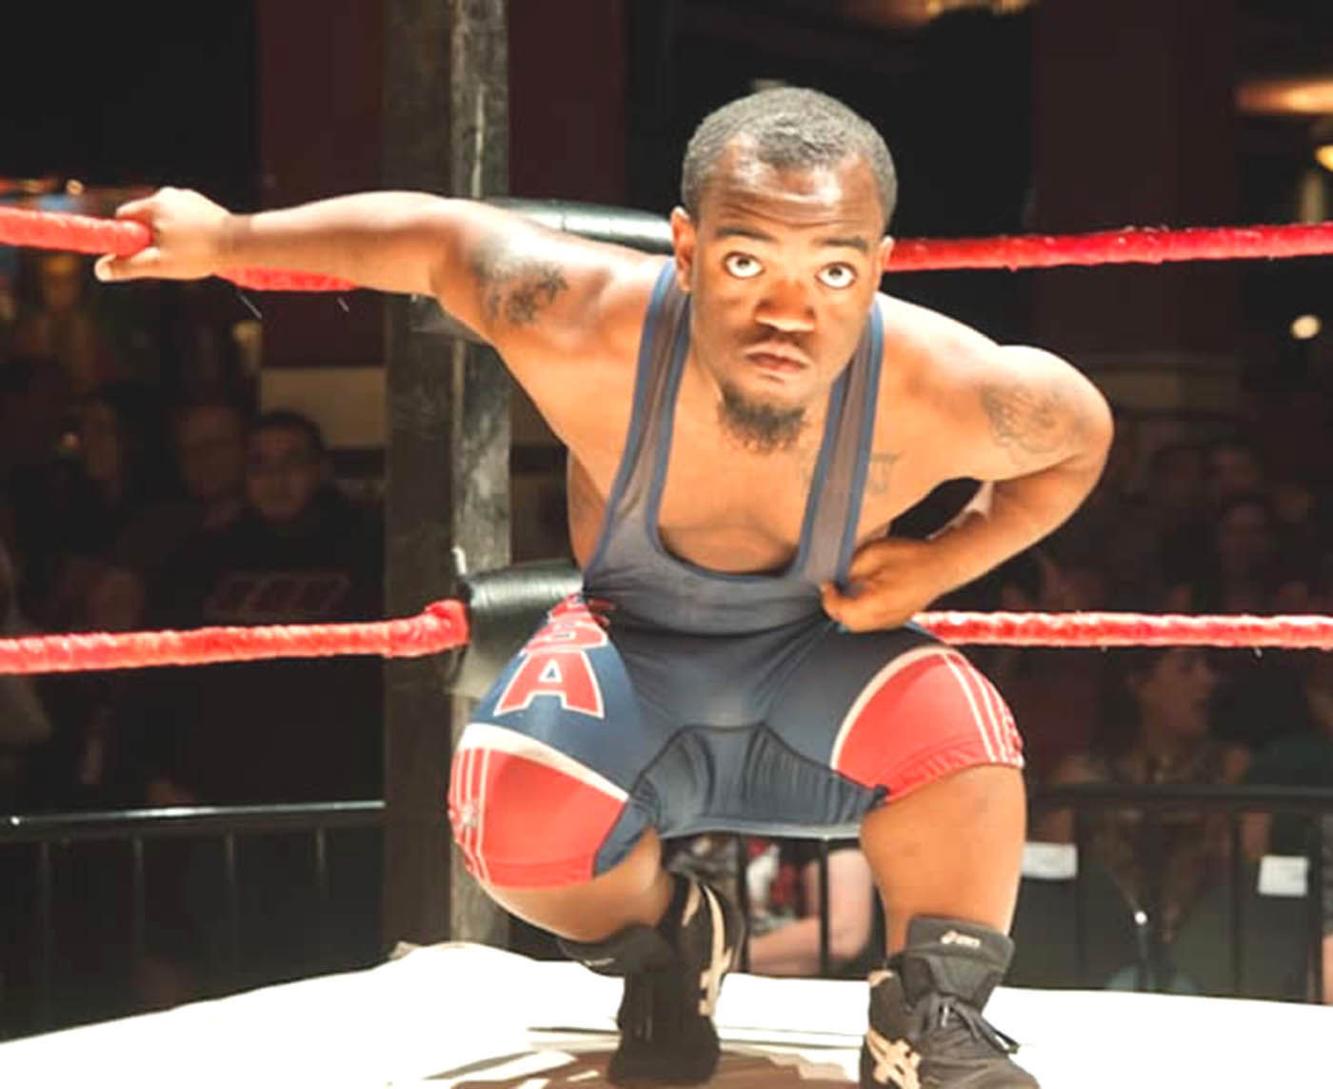 Midget wrestling comes to town Sports